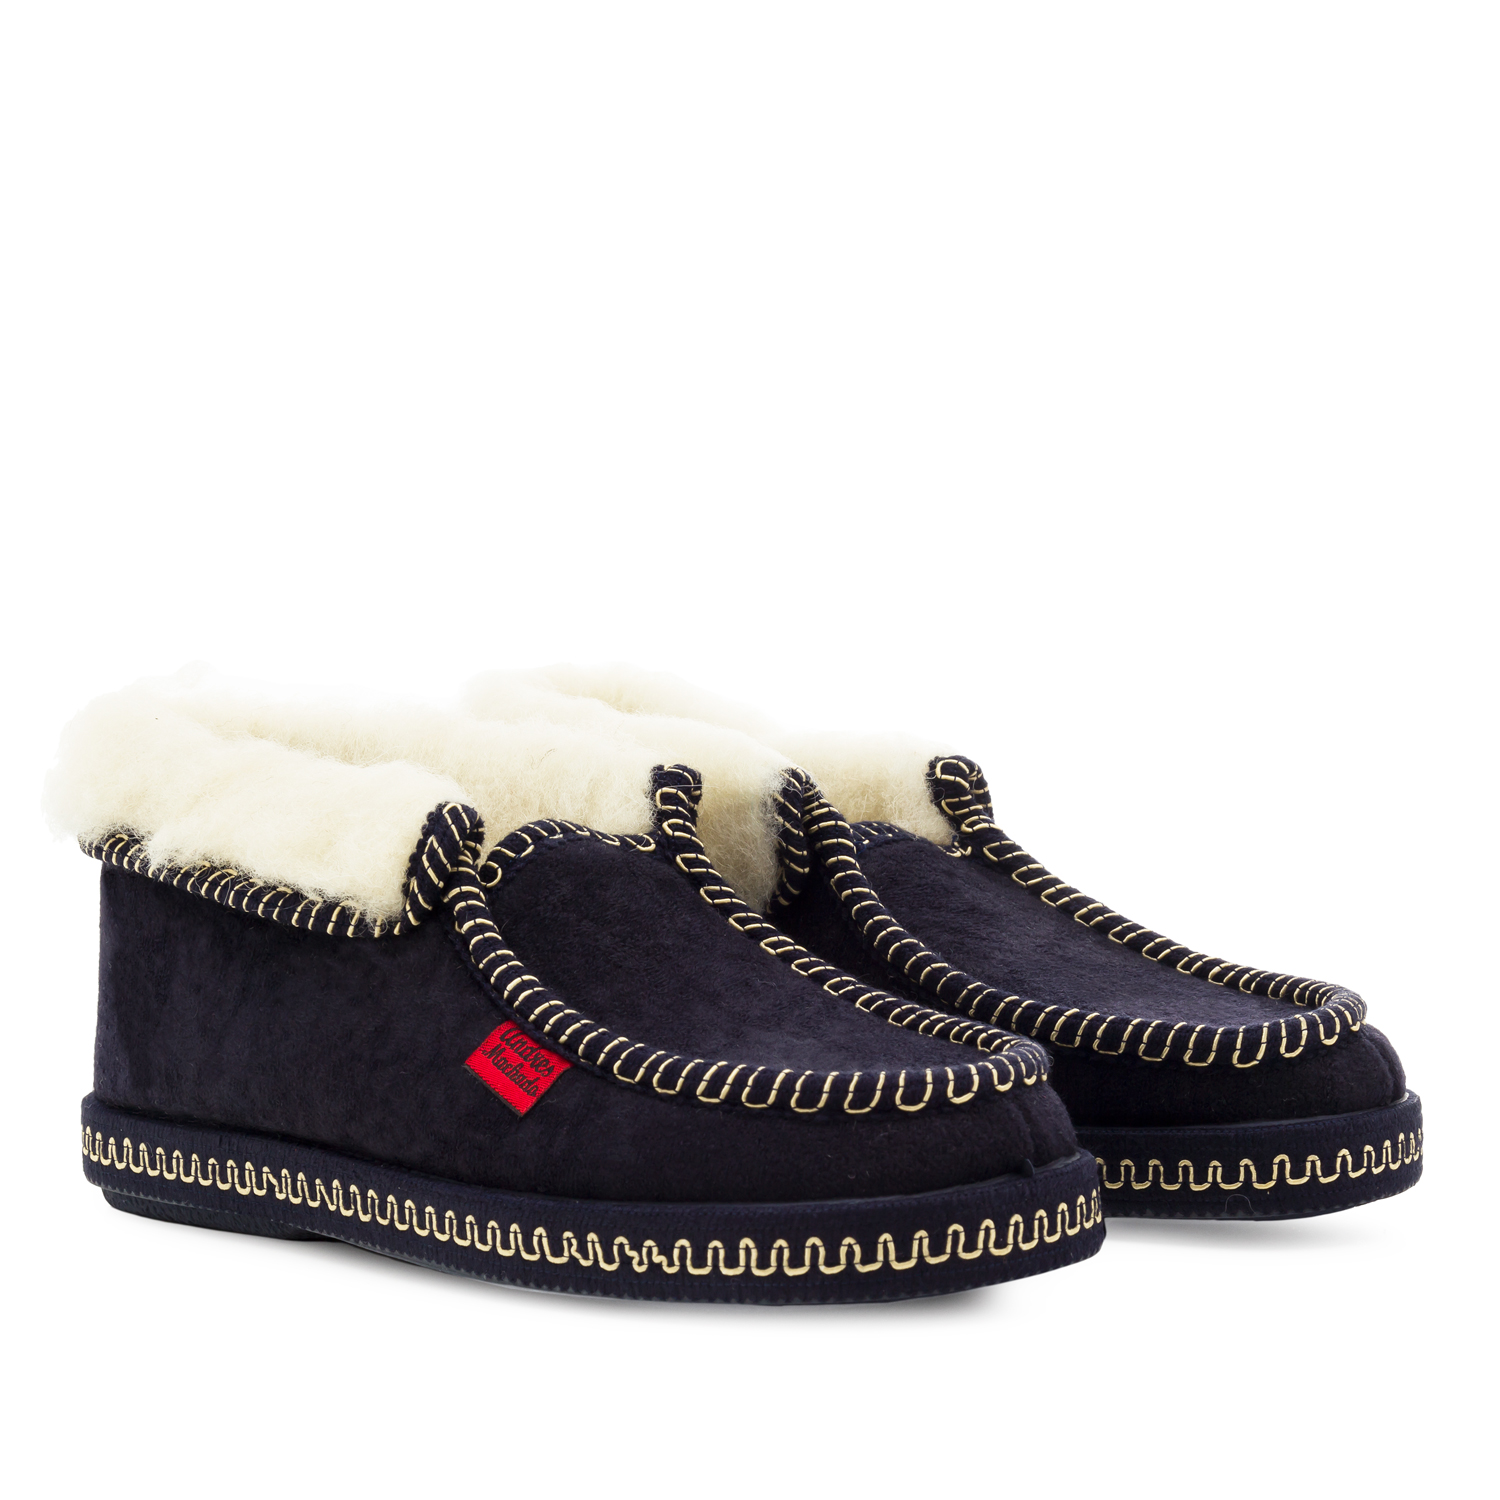 Navy Blue Ankle High Slippers. 